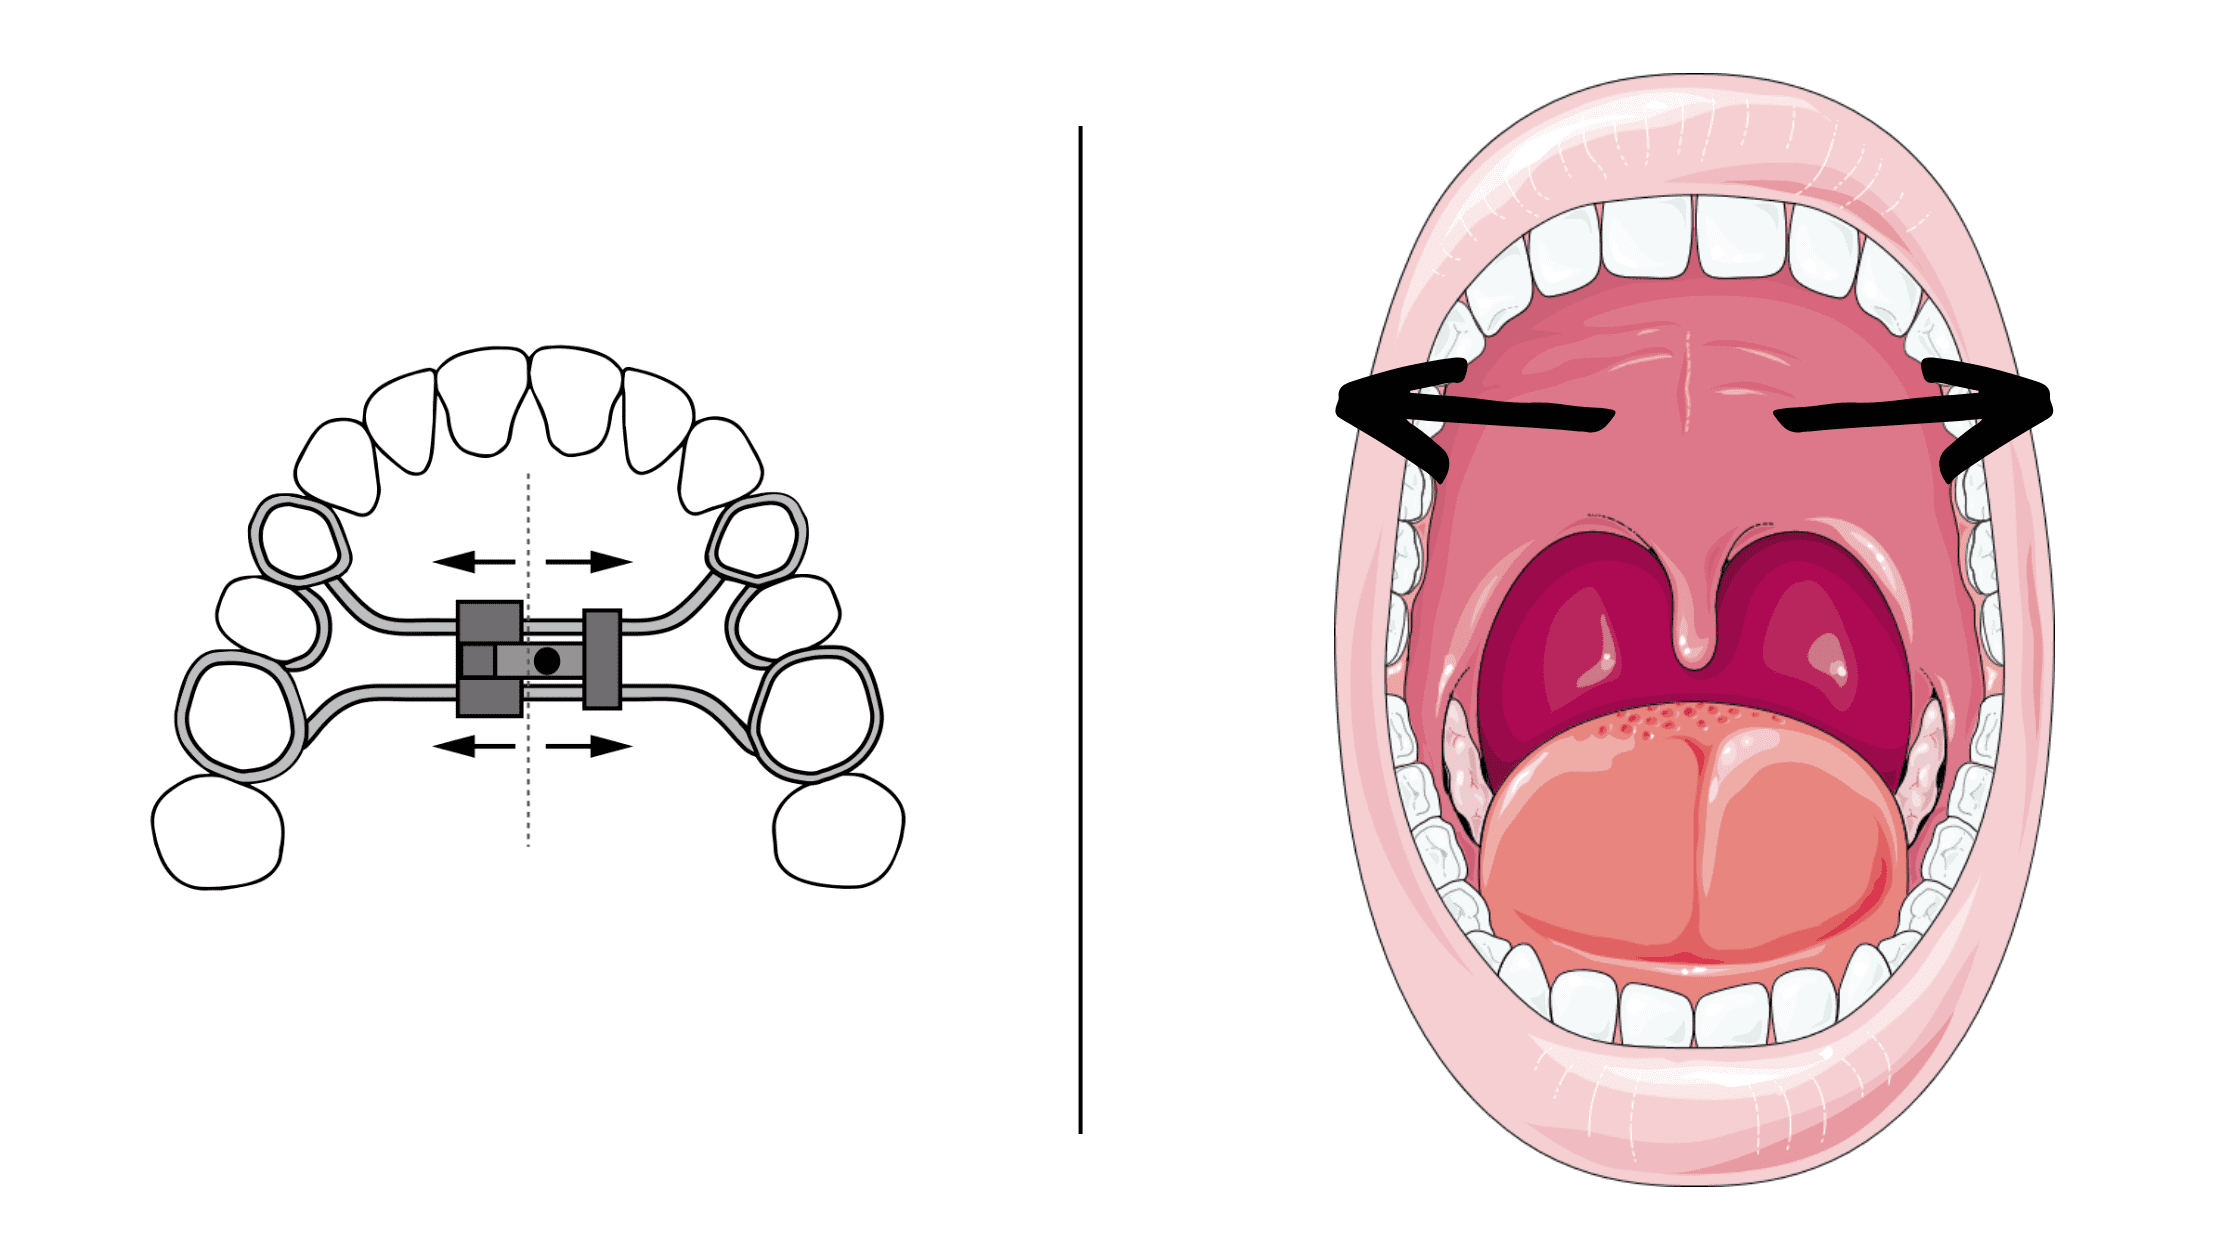 Palatal expander stimulating the growth of the upper jaw